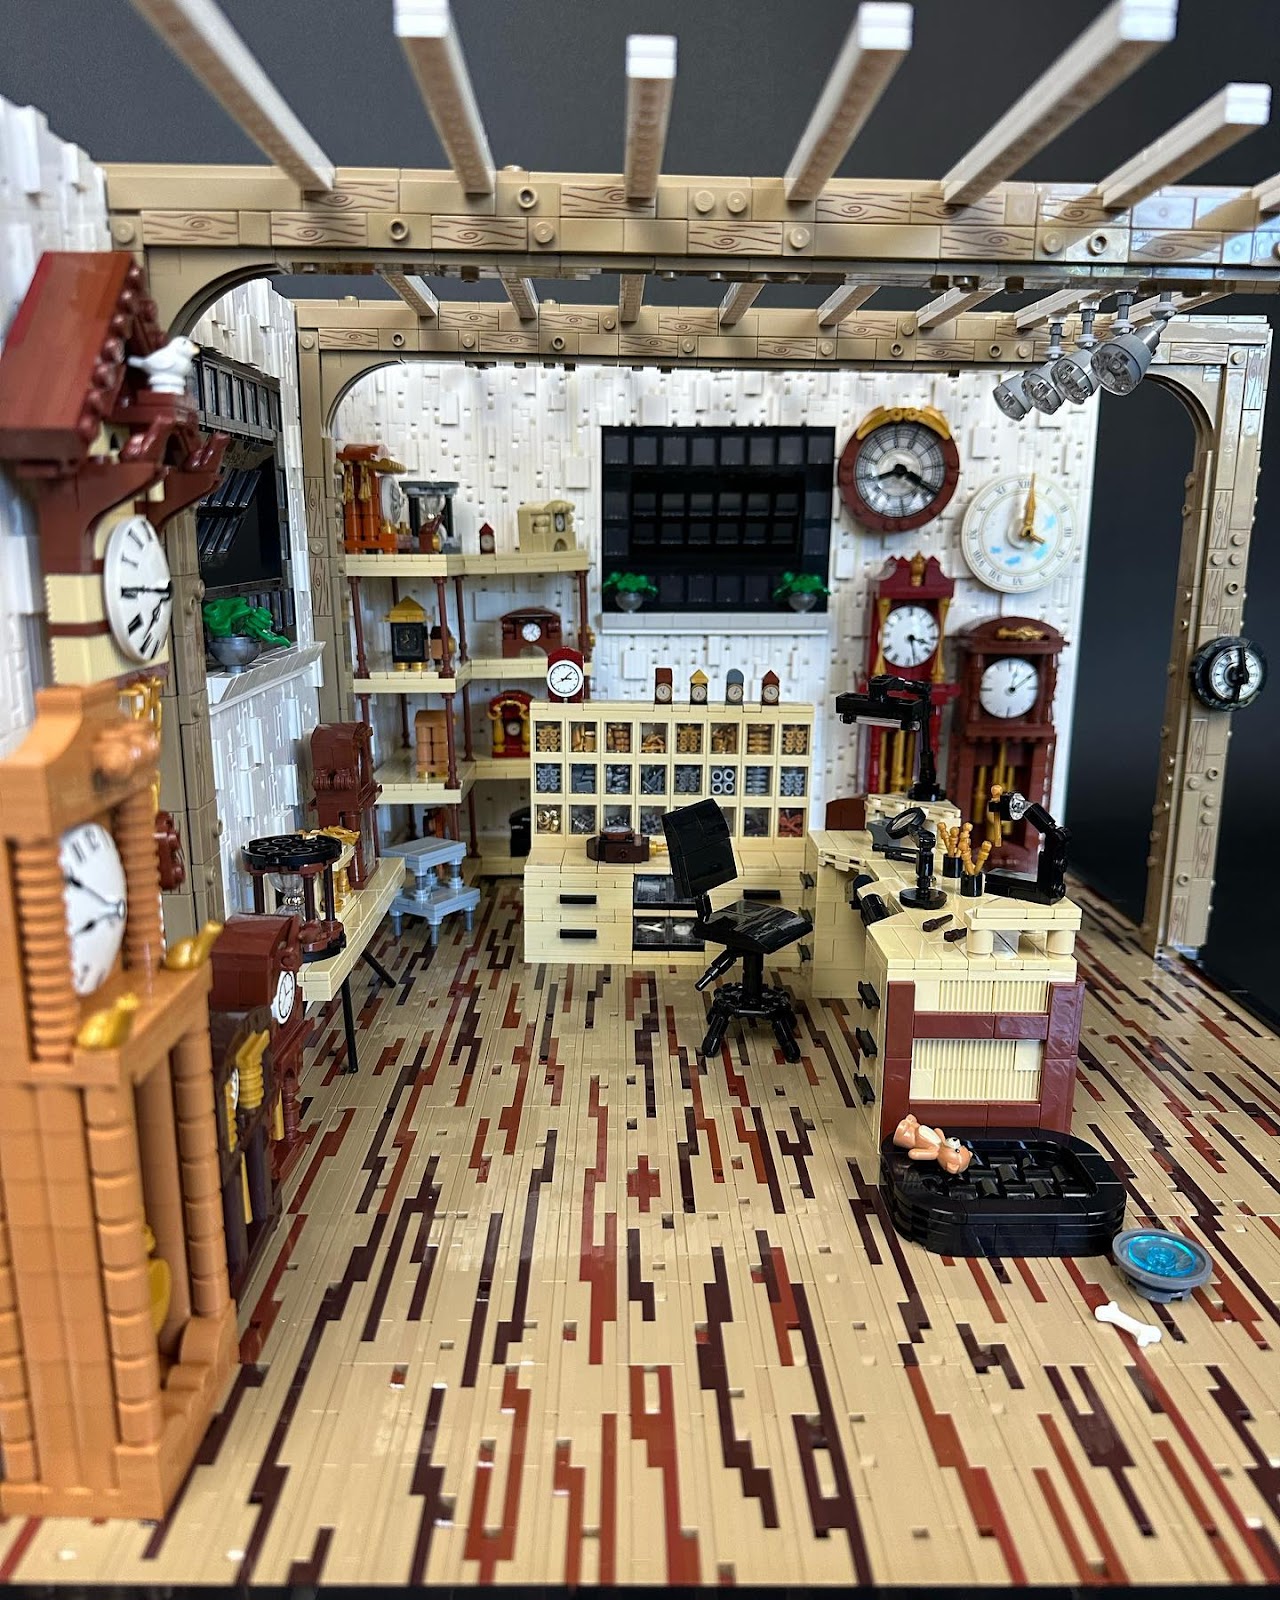 A photo of the Lego Creation Clockmaker's Studio by Kelly Bartlett, showing a cozy store with clocks of many different styles lining the walls, a desk chair and desk with tools, and an organizer with clock parts